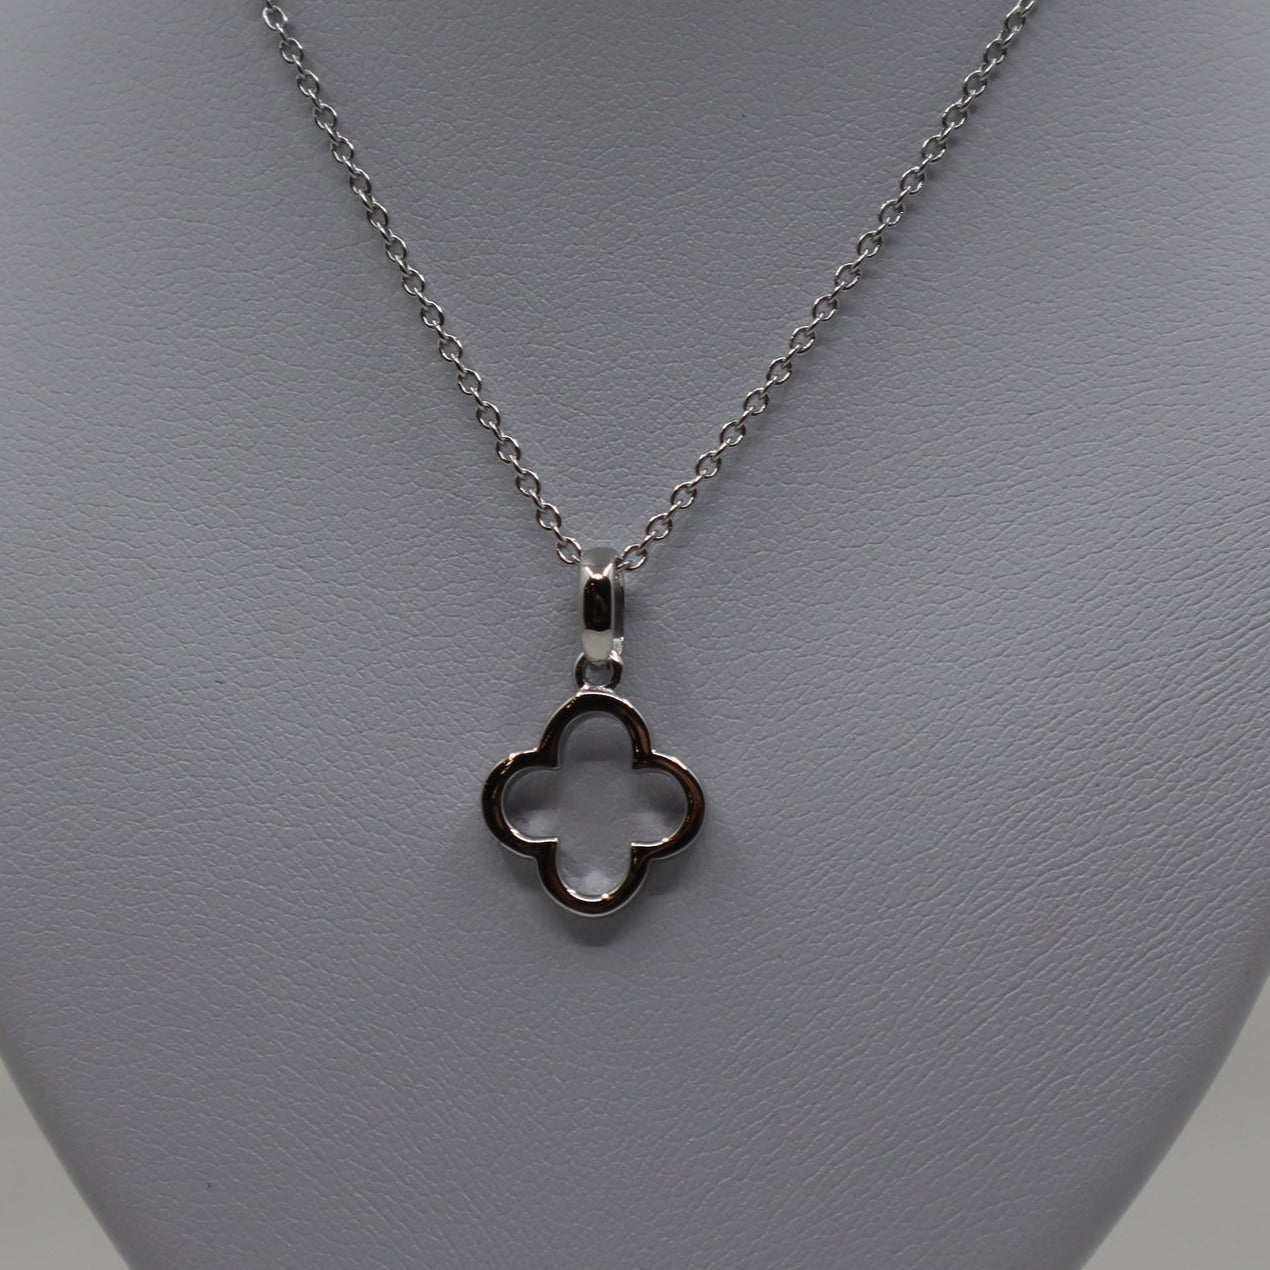 Silver Clover Pendant and Chain